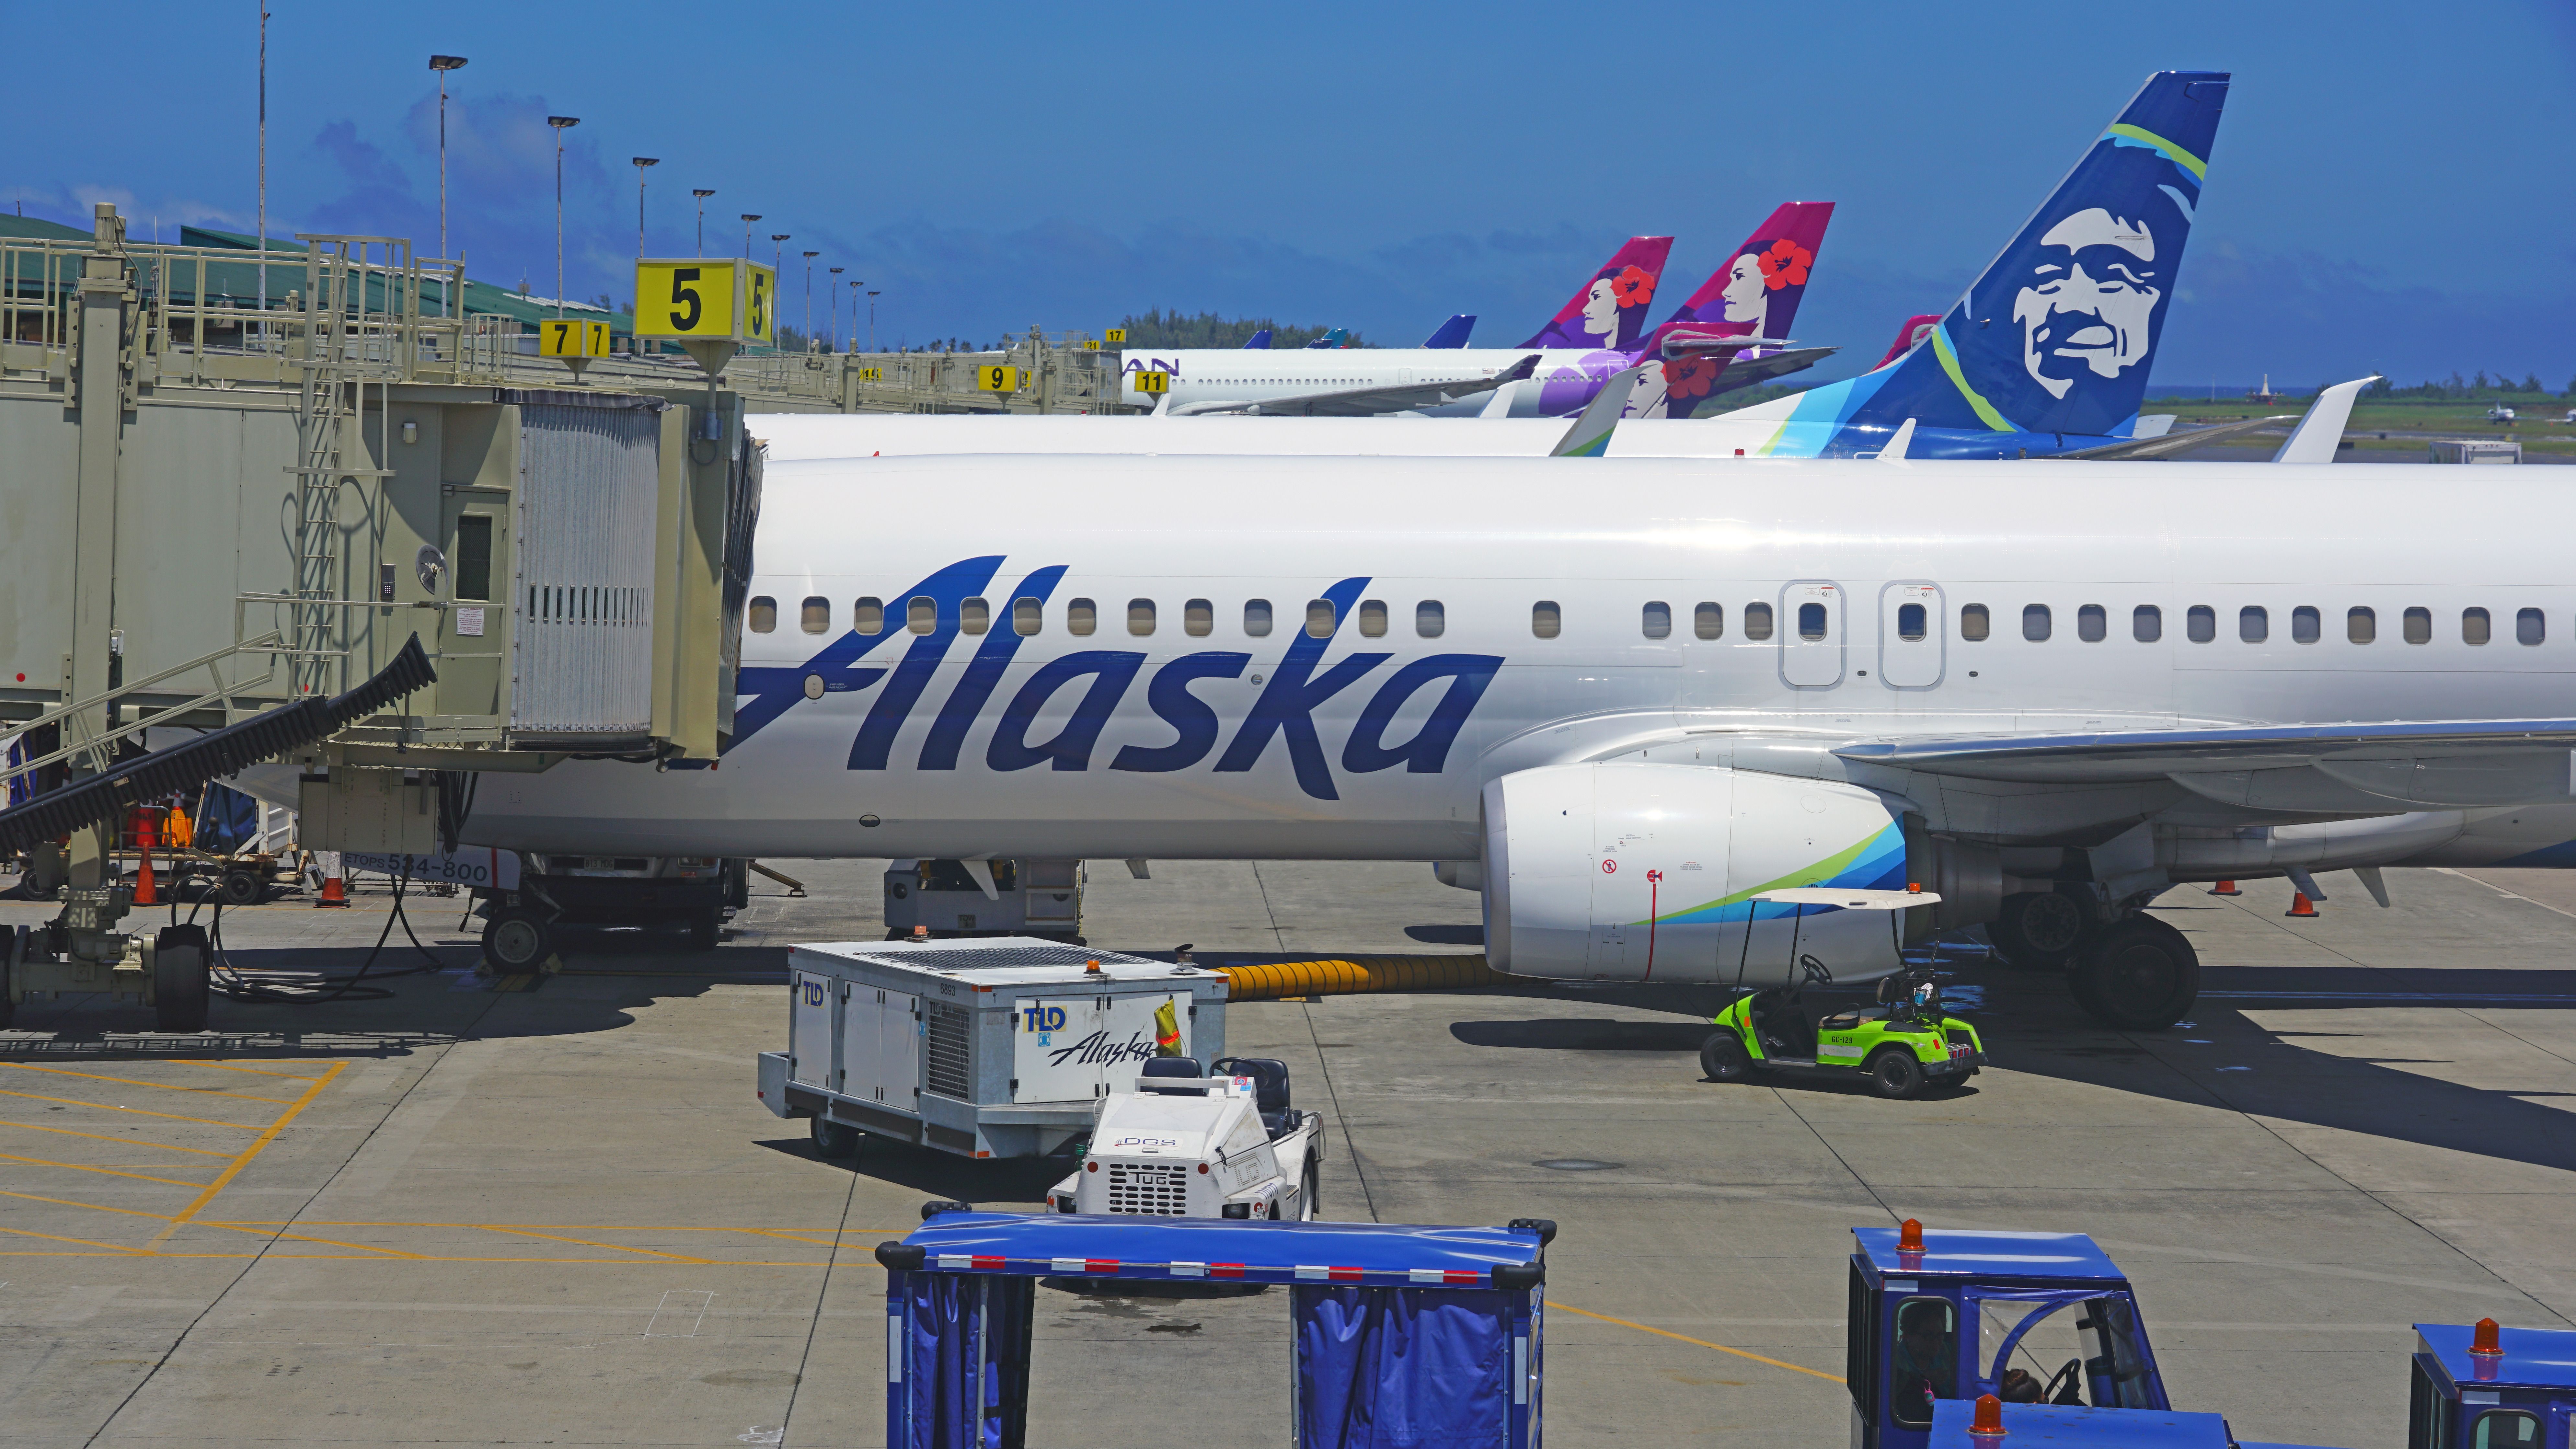 Two Alaska Airlines aircraft parked next to two Hawaiian Airlines aircraft at an airport.